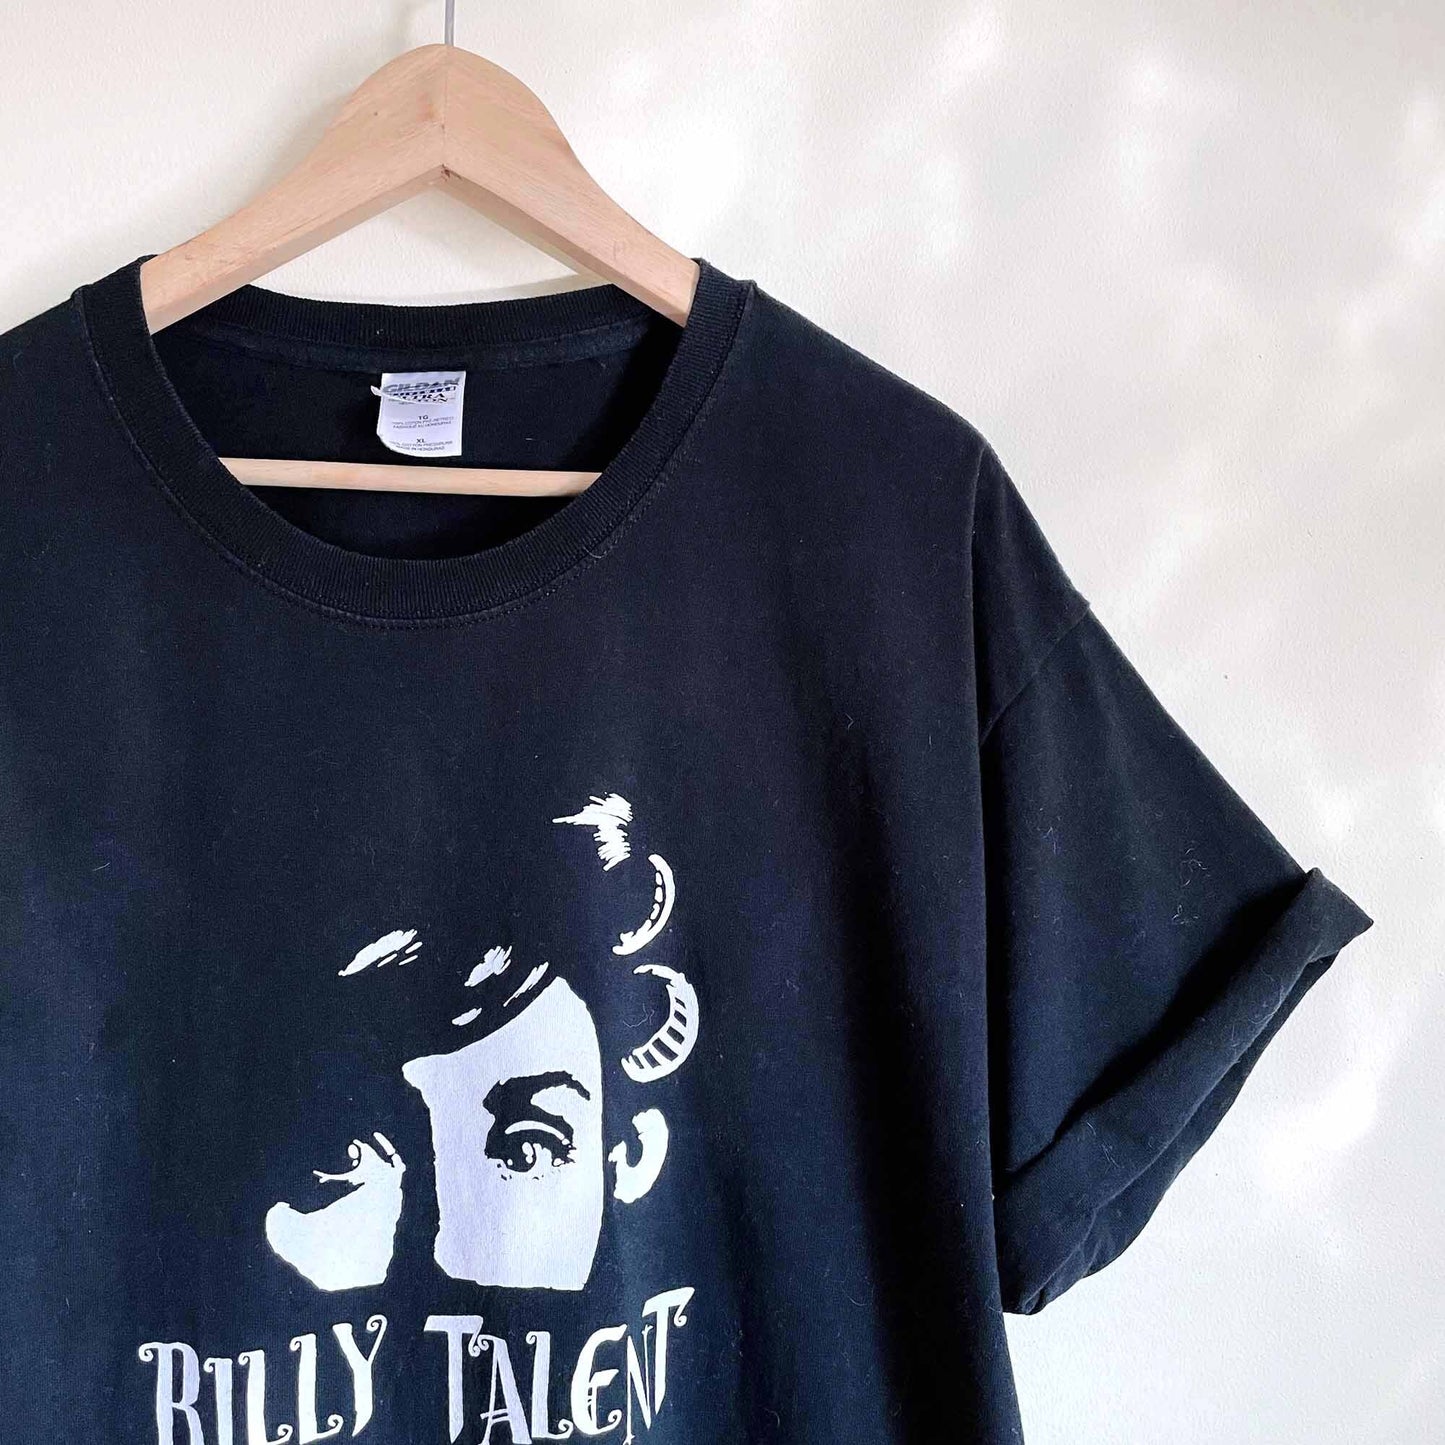 Billy Talent vintage band tee - size xl